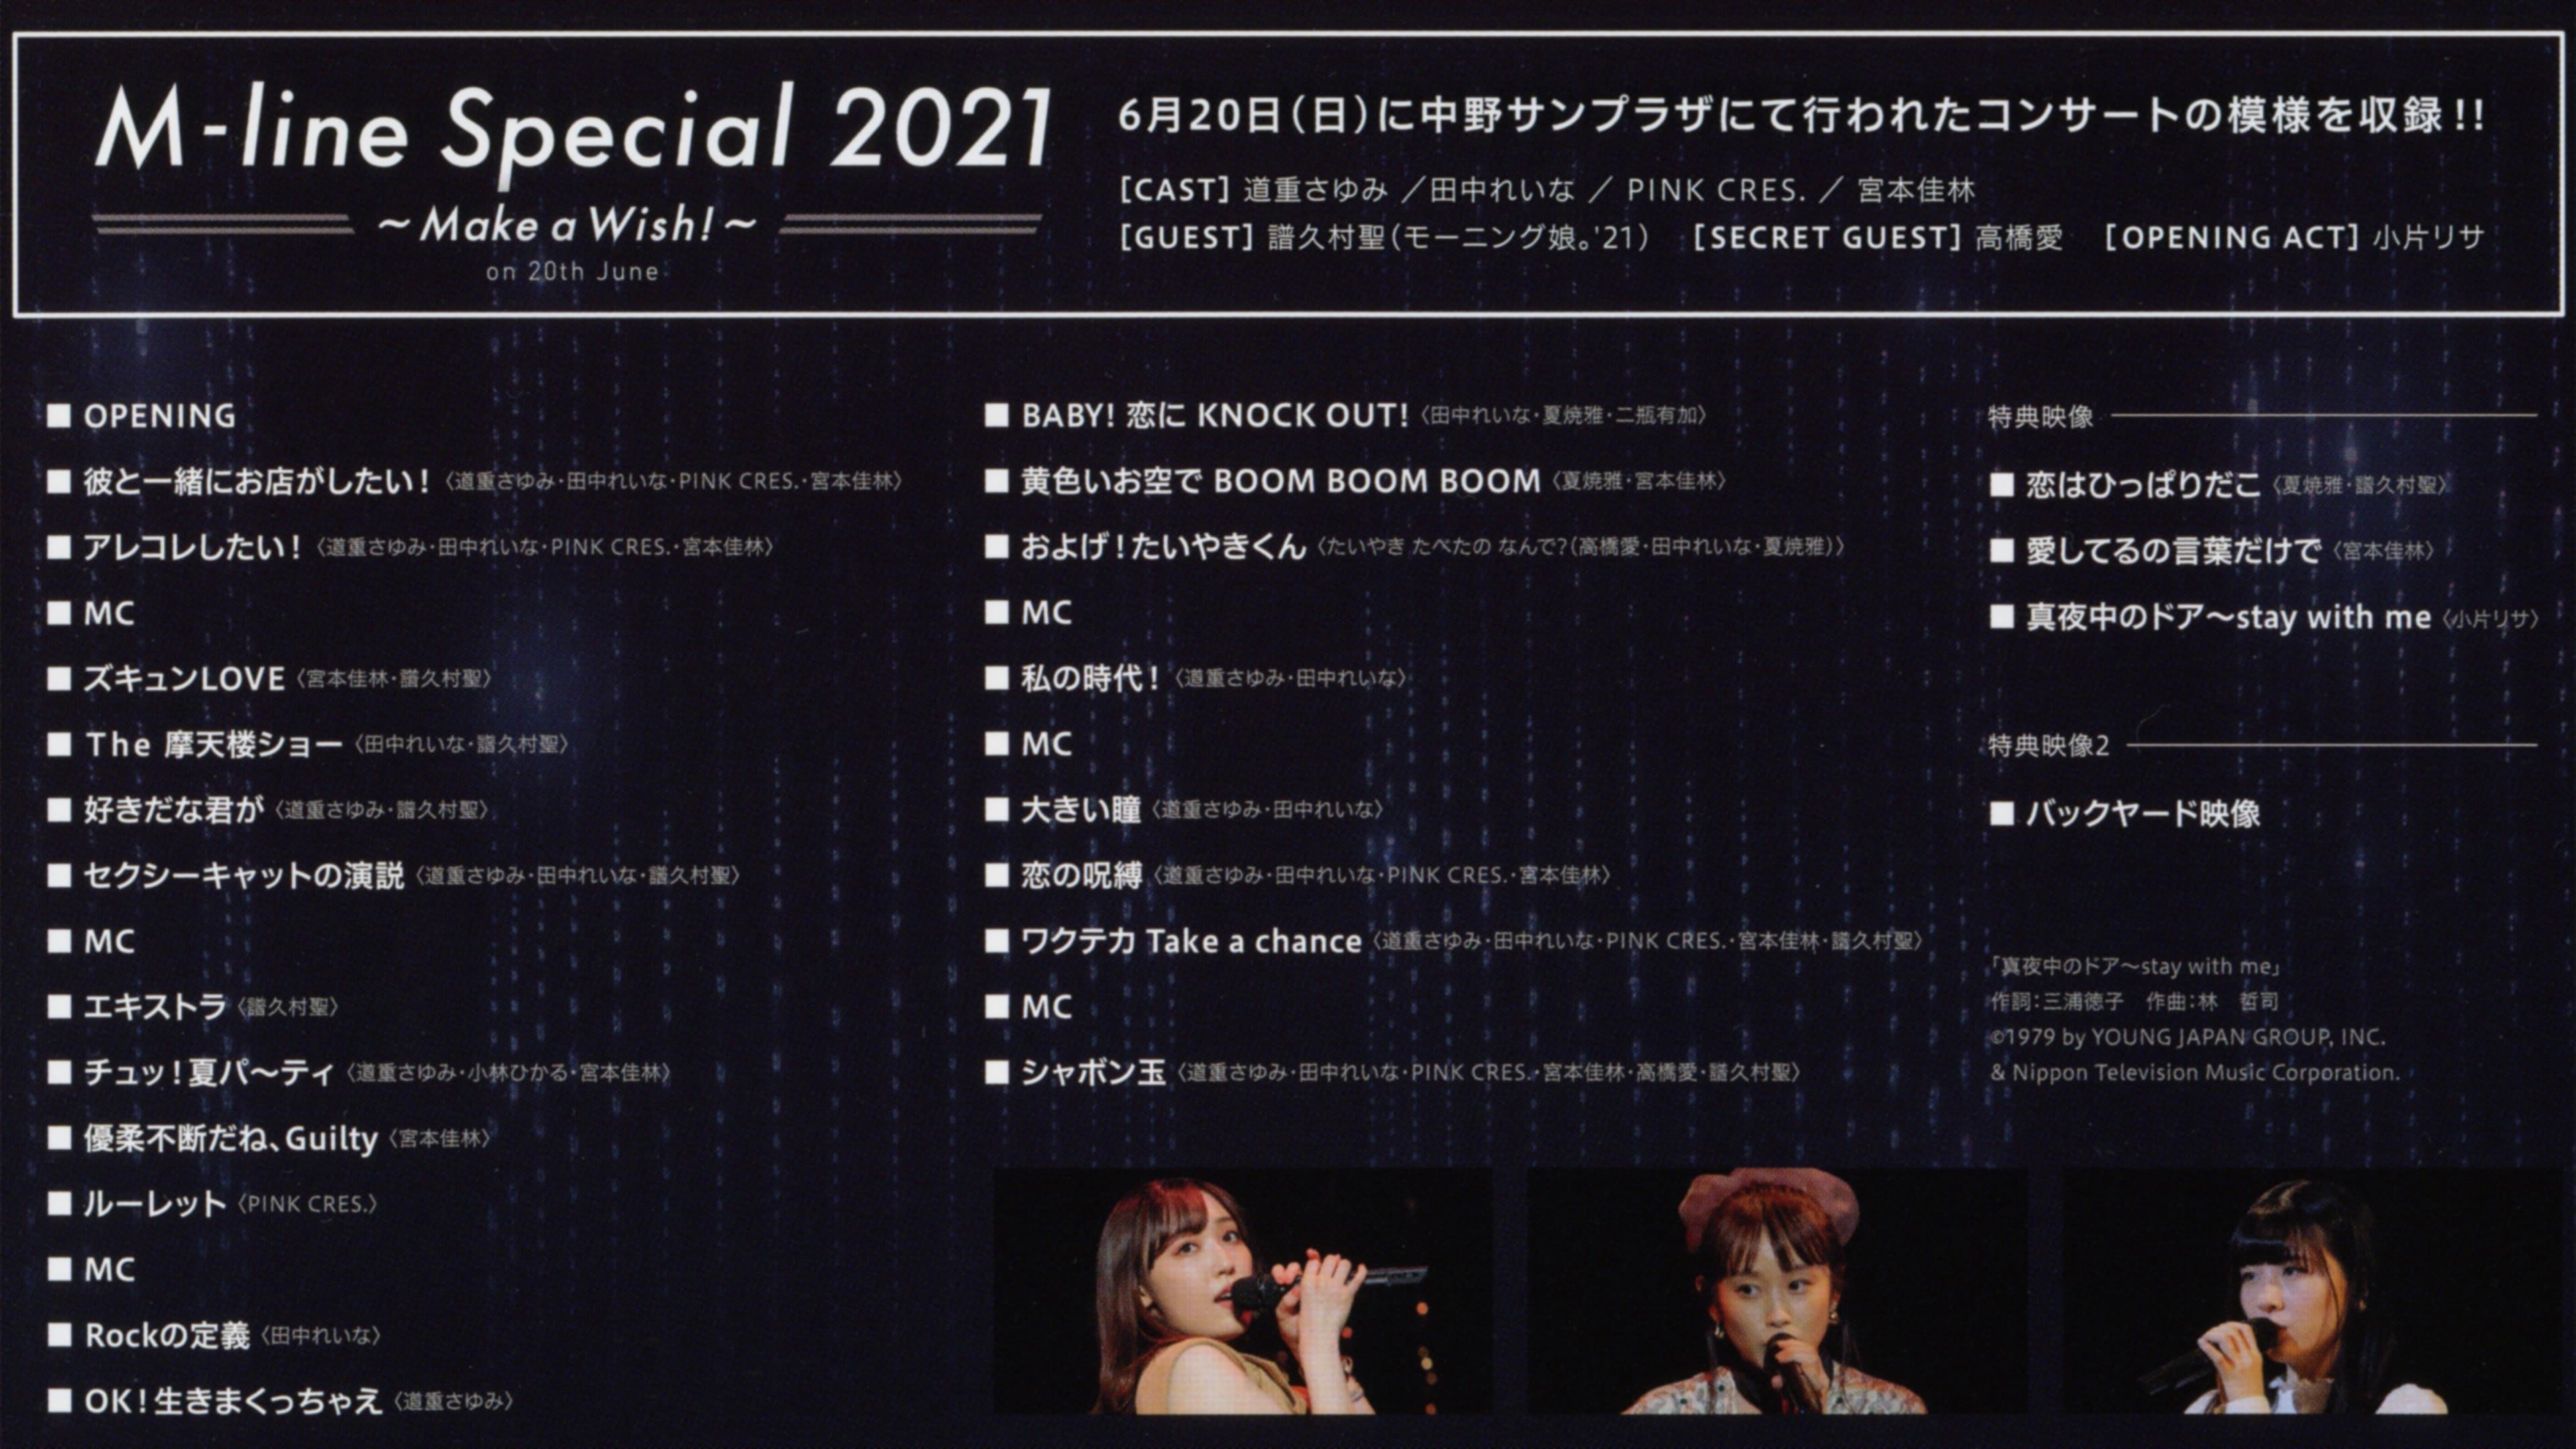 M-line Special 2021 ~Make a Wish!~ backdrop